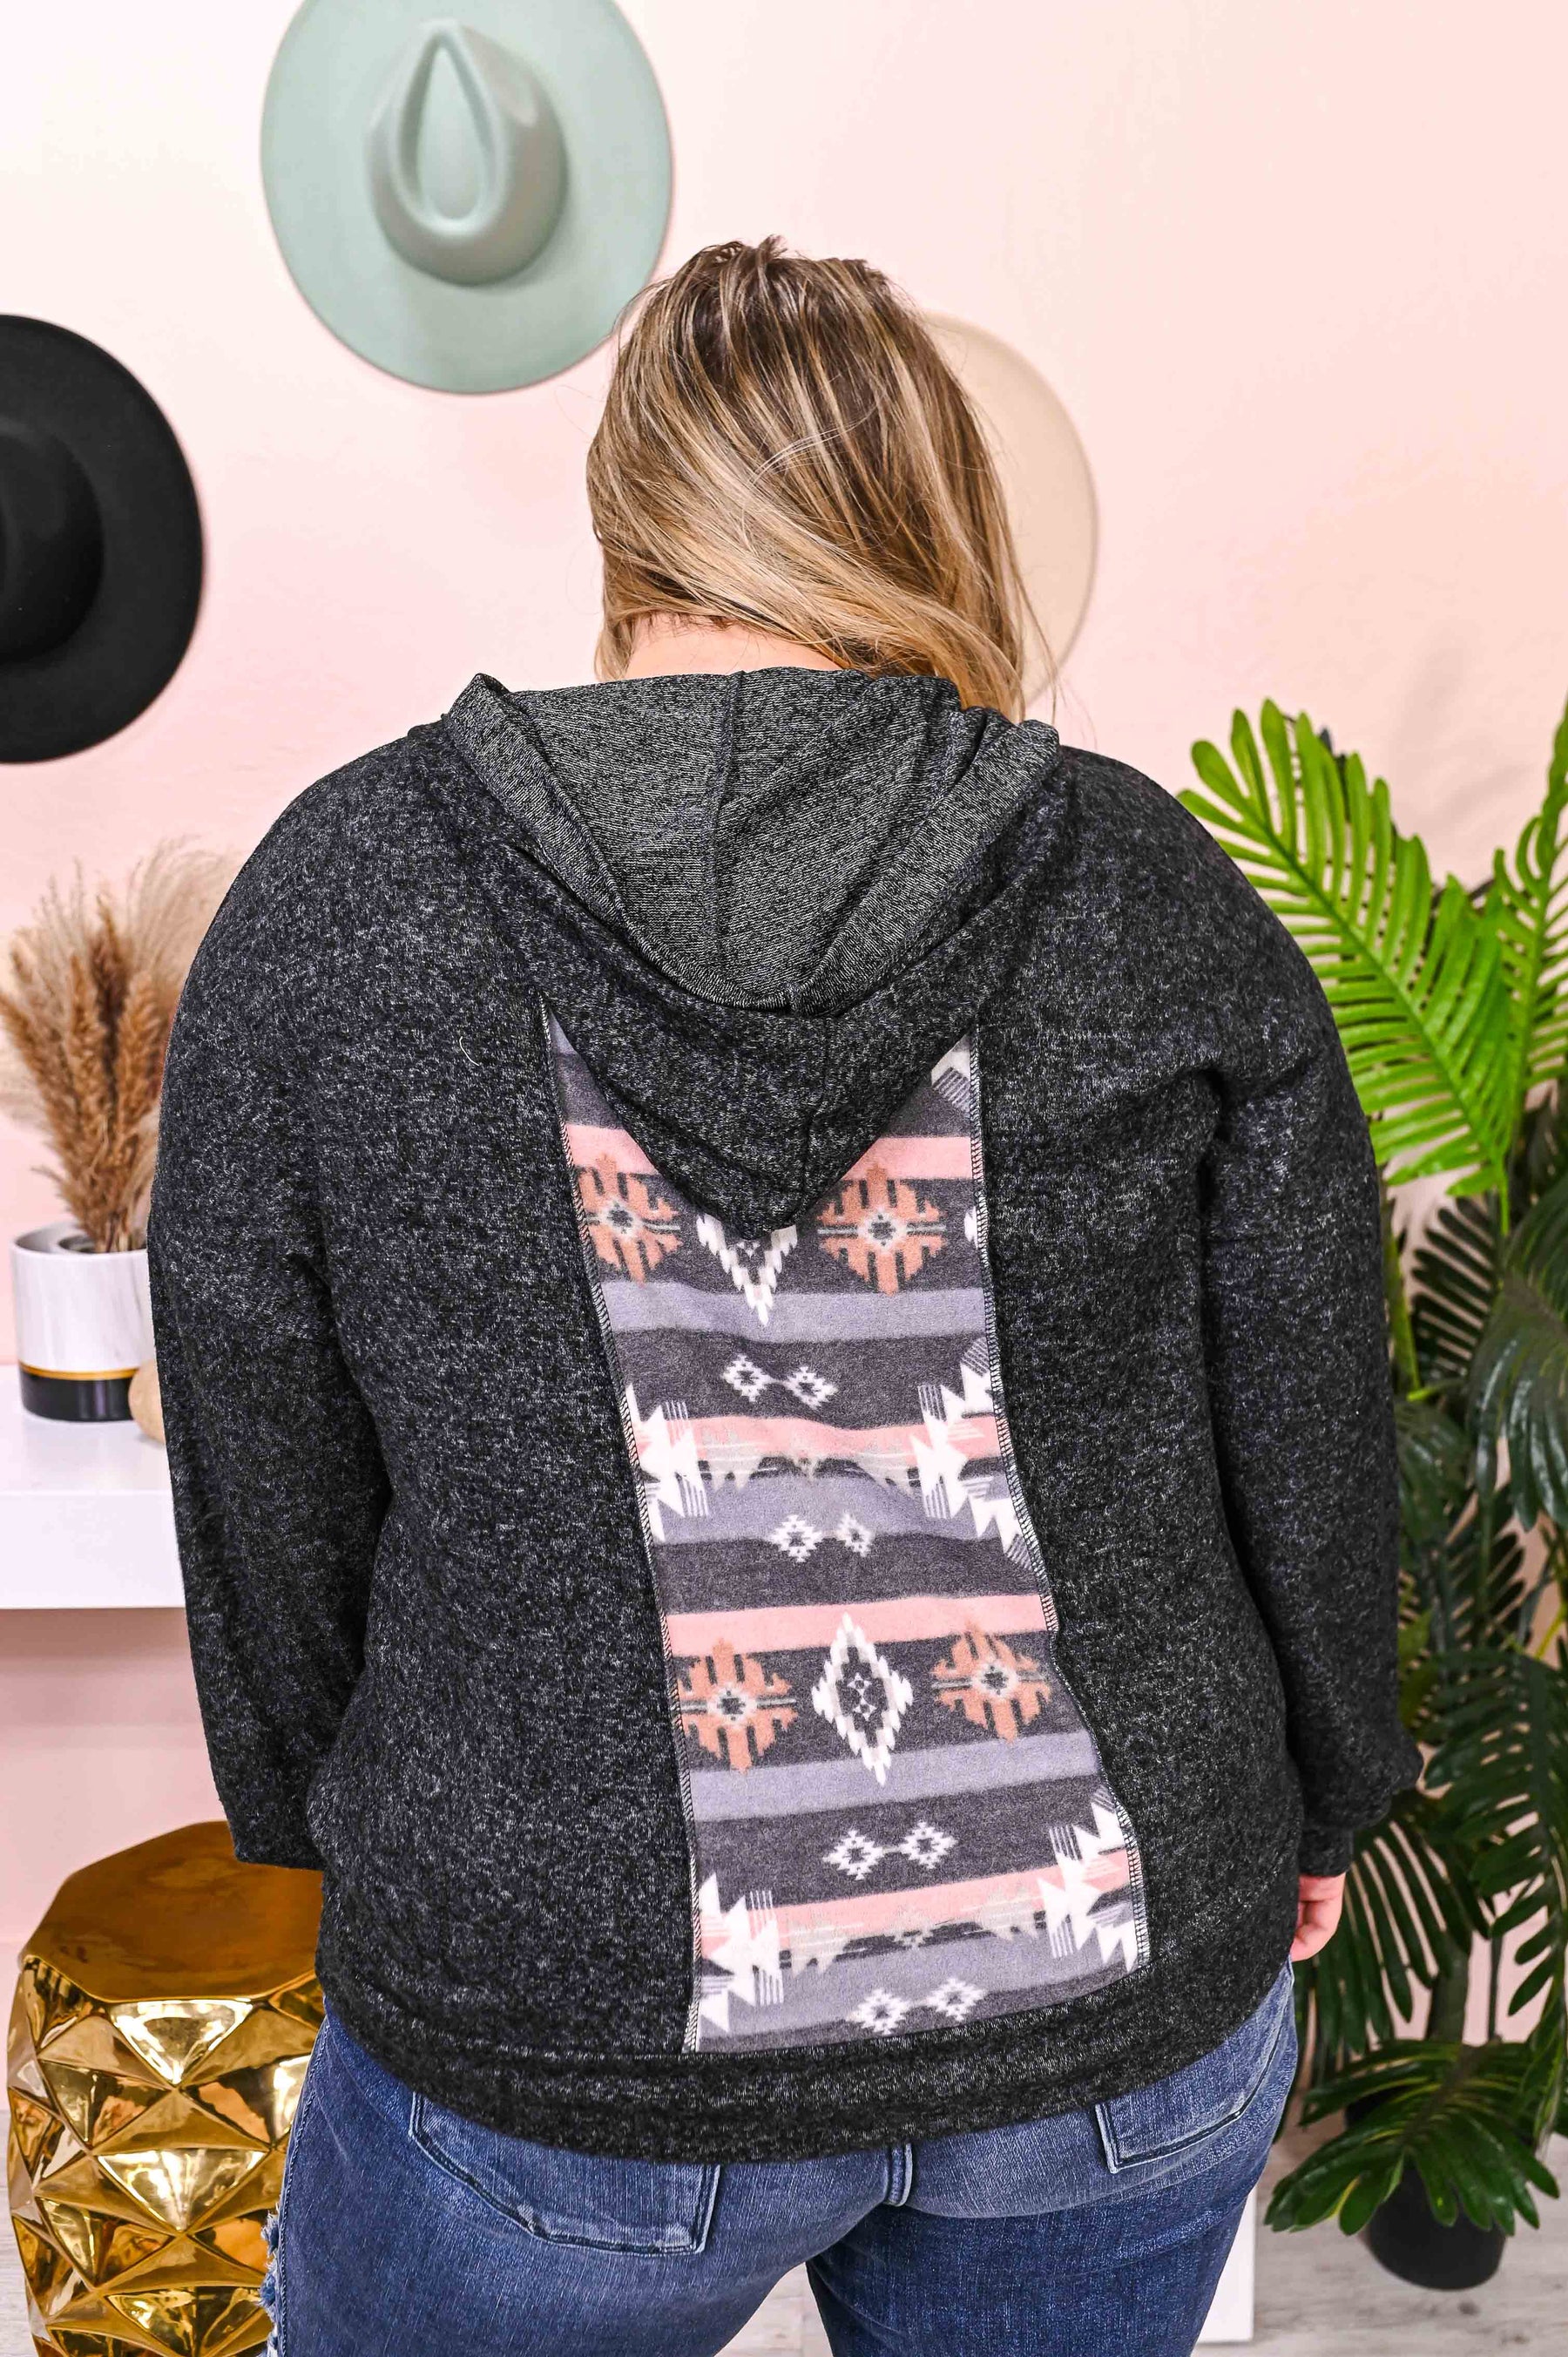 I'm Stuck On You Black/Gray Aztec Printed Hooded Top - T5504BK